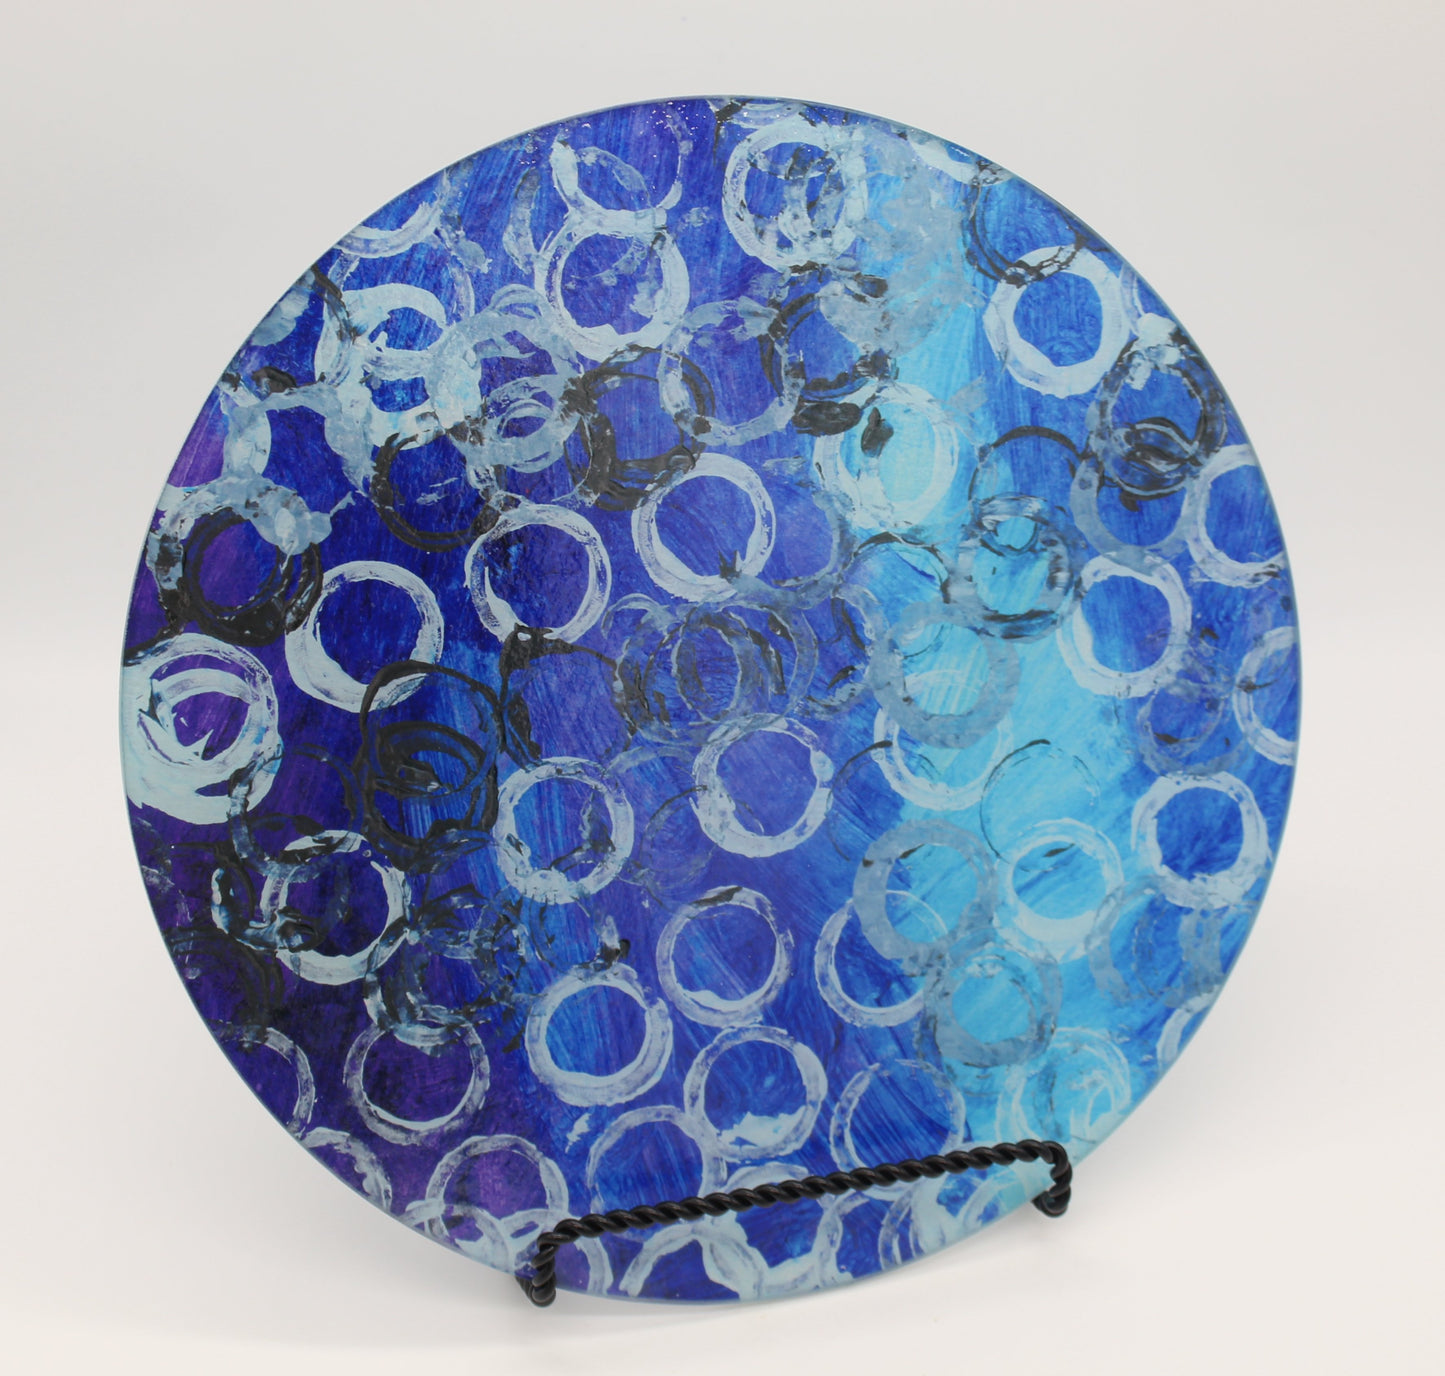 Circular glass cutting board depicting gradient blue background with white and black circles overlaid